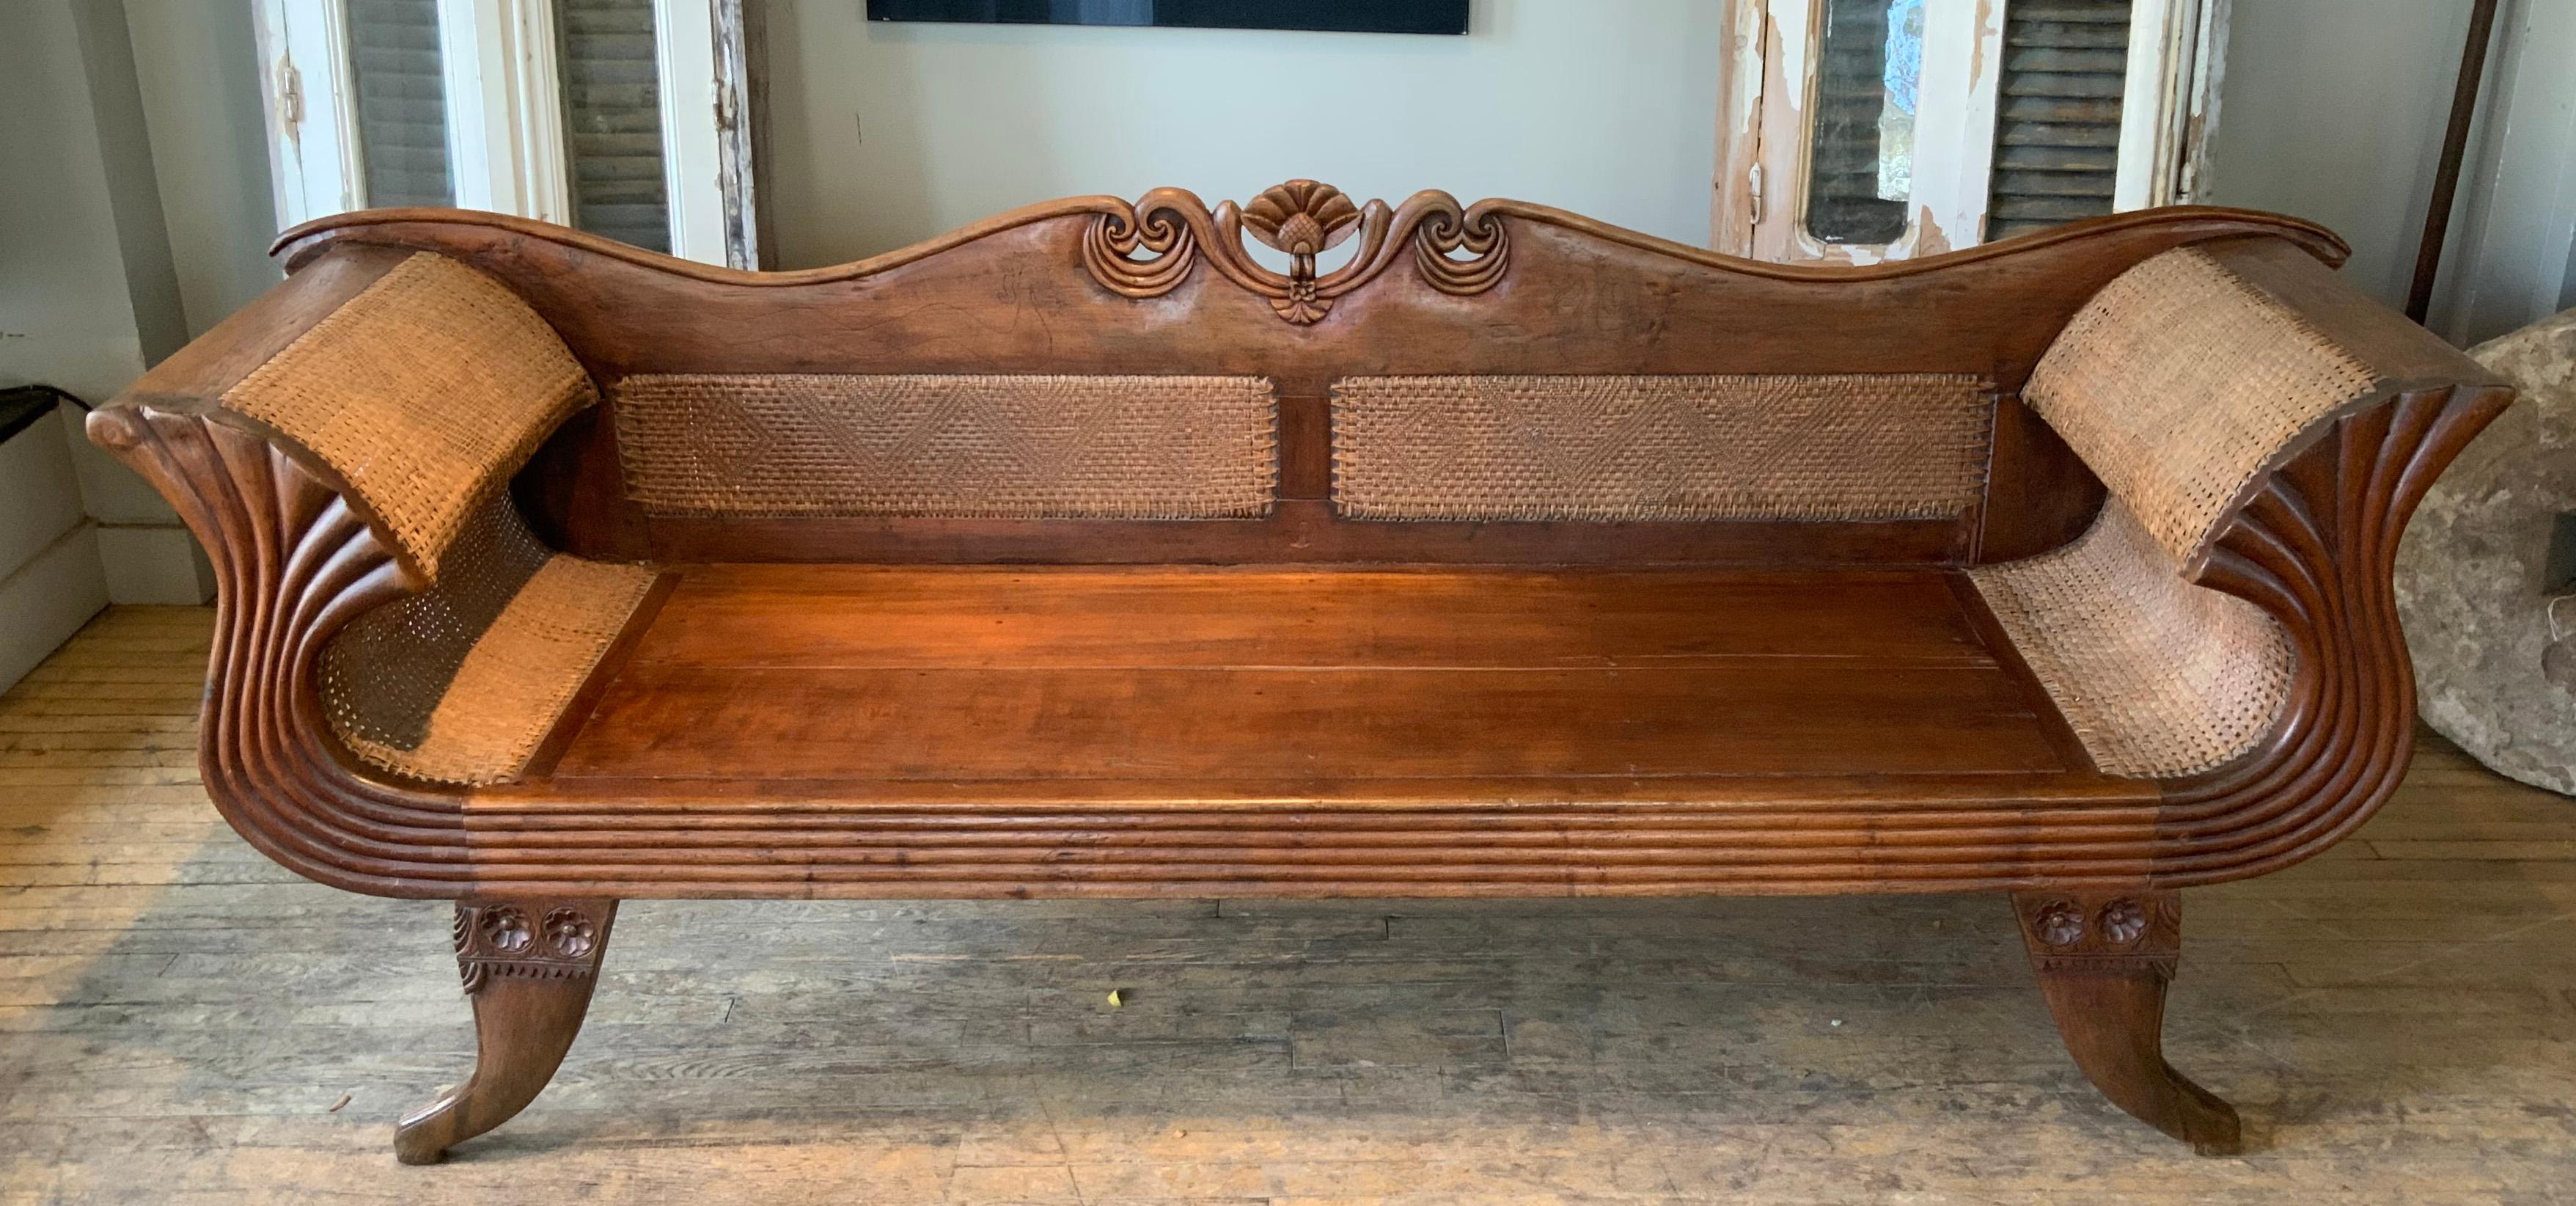 An extraordinary antique Anglo Caribbean teak and cane settee, with beautiful scrolled and curved arms, and a carved arched back. wonderful scale and details!